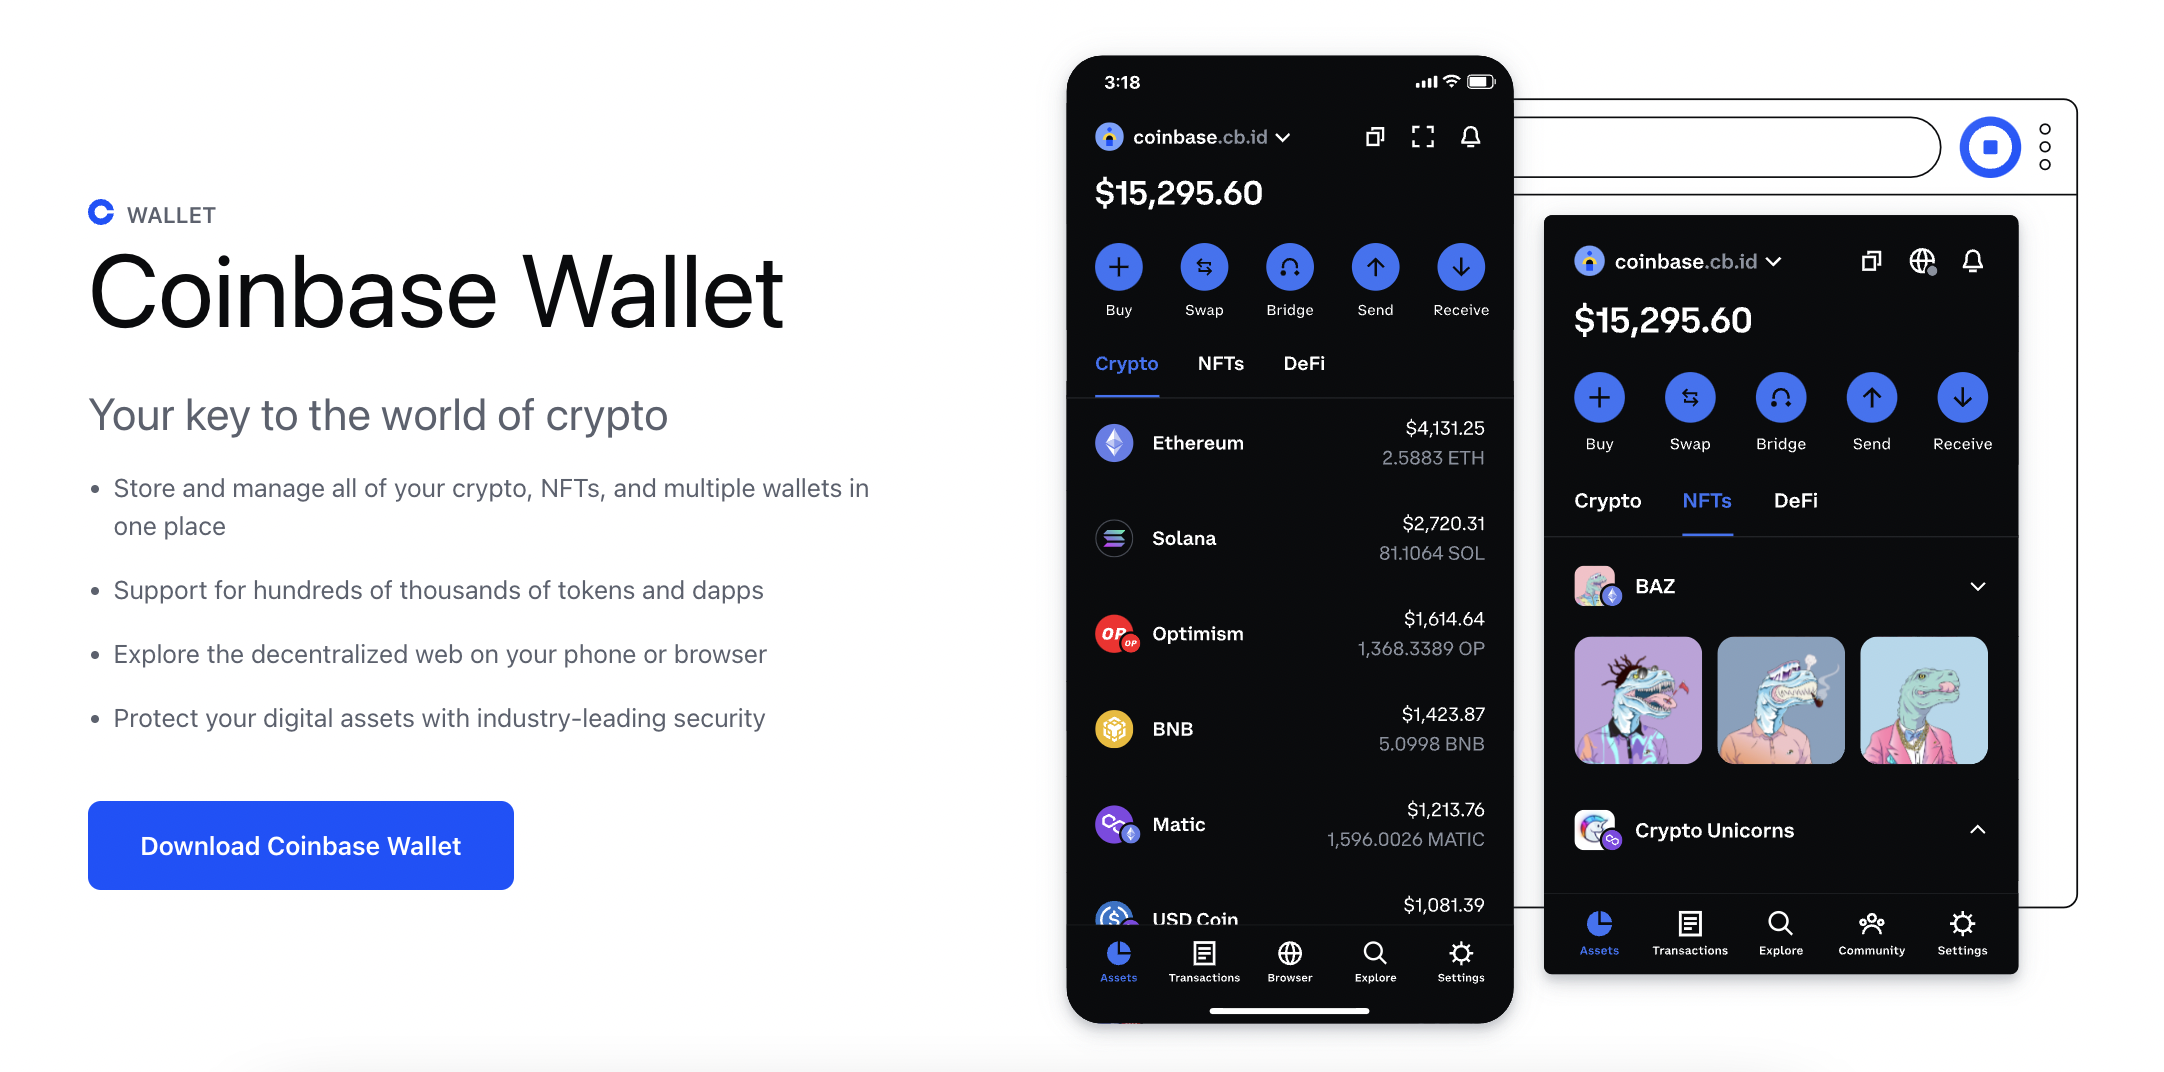 Coinbase Wallet review